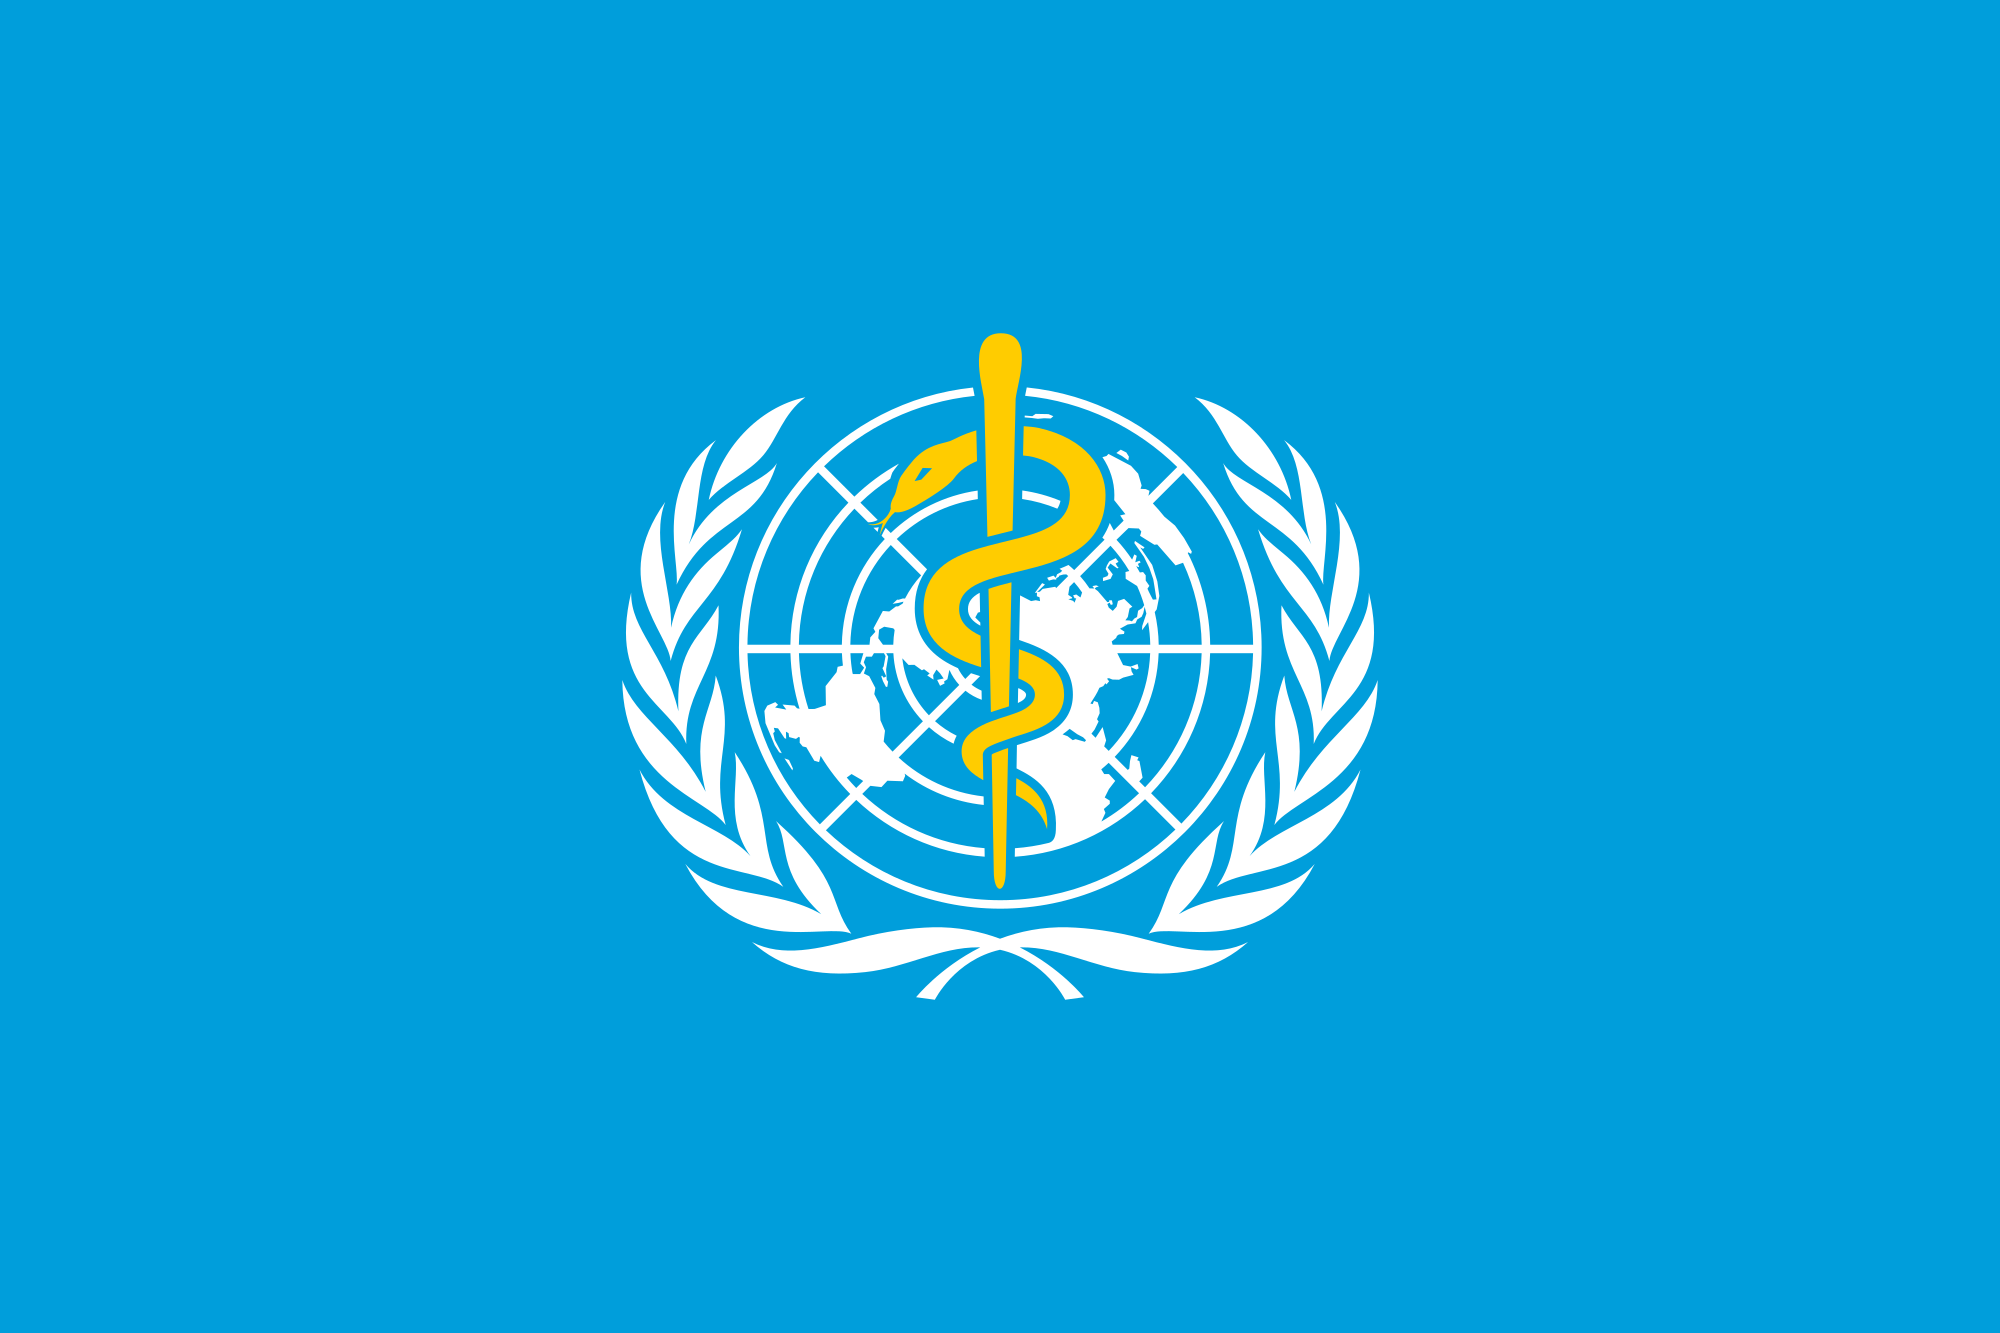 United Nations flag with Staff of Life - combined UN and World Health Organization (WHO) flag